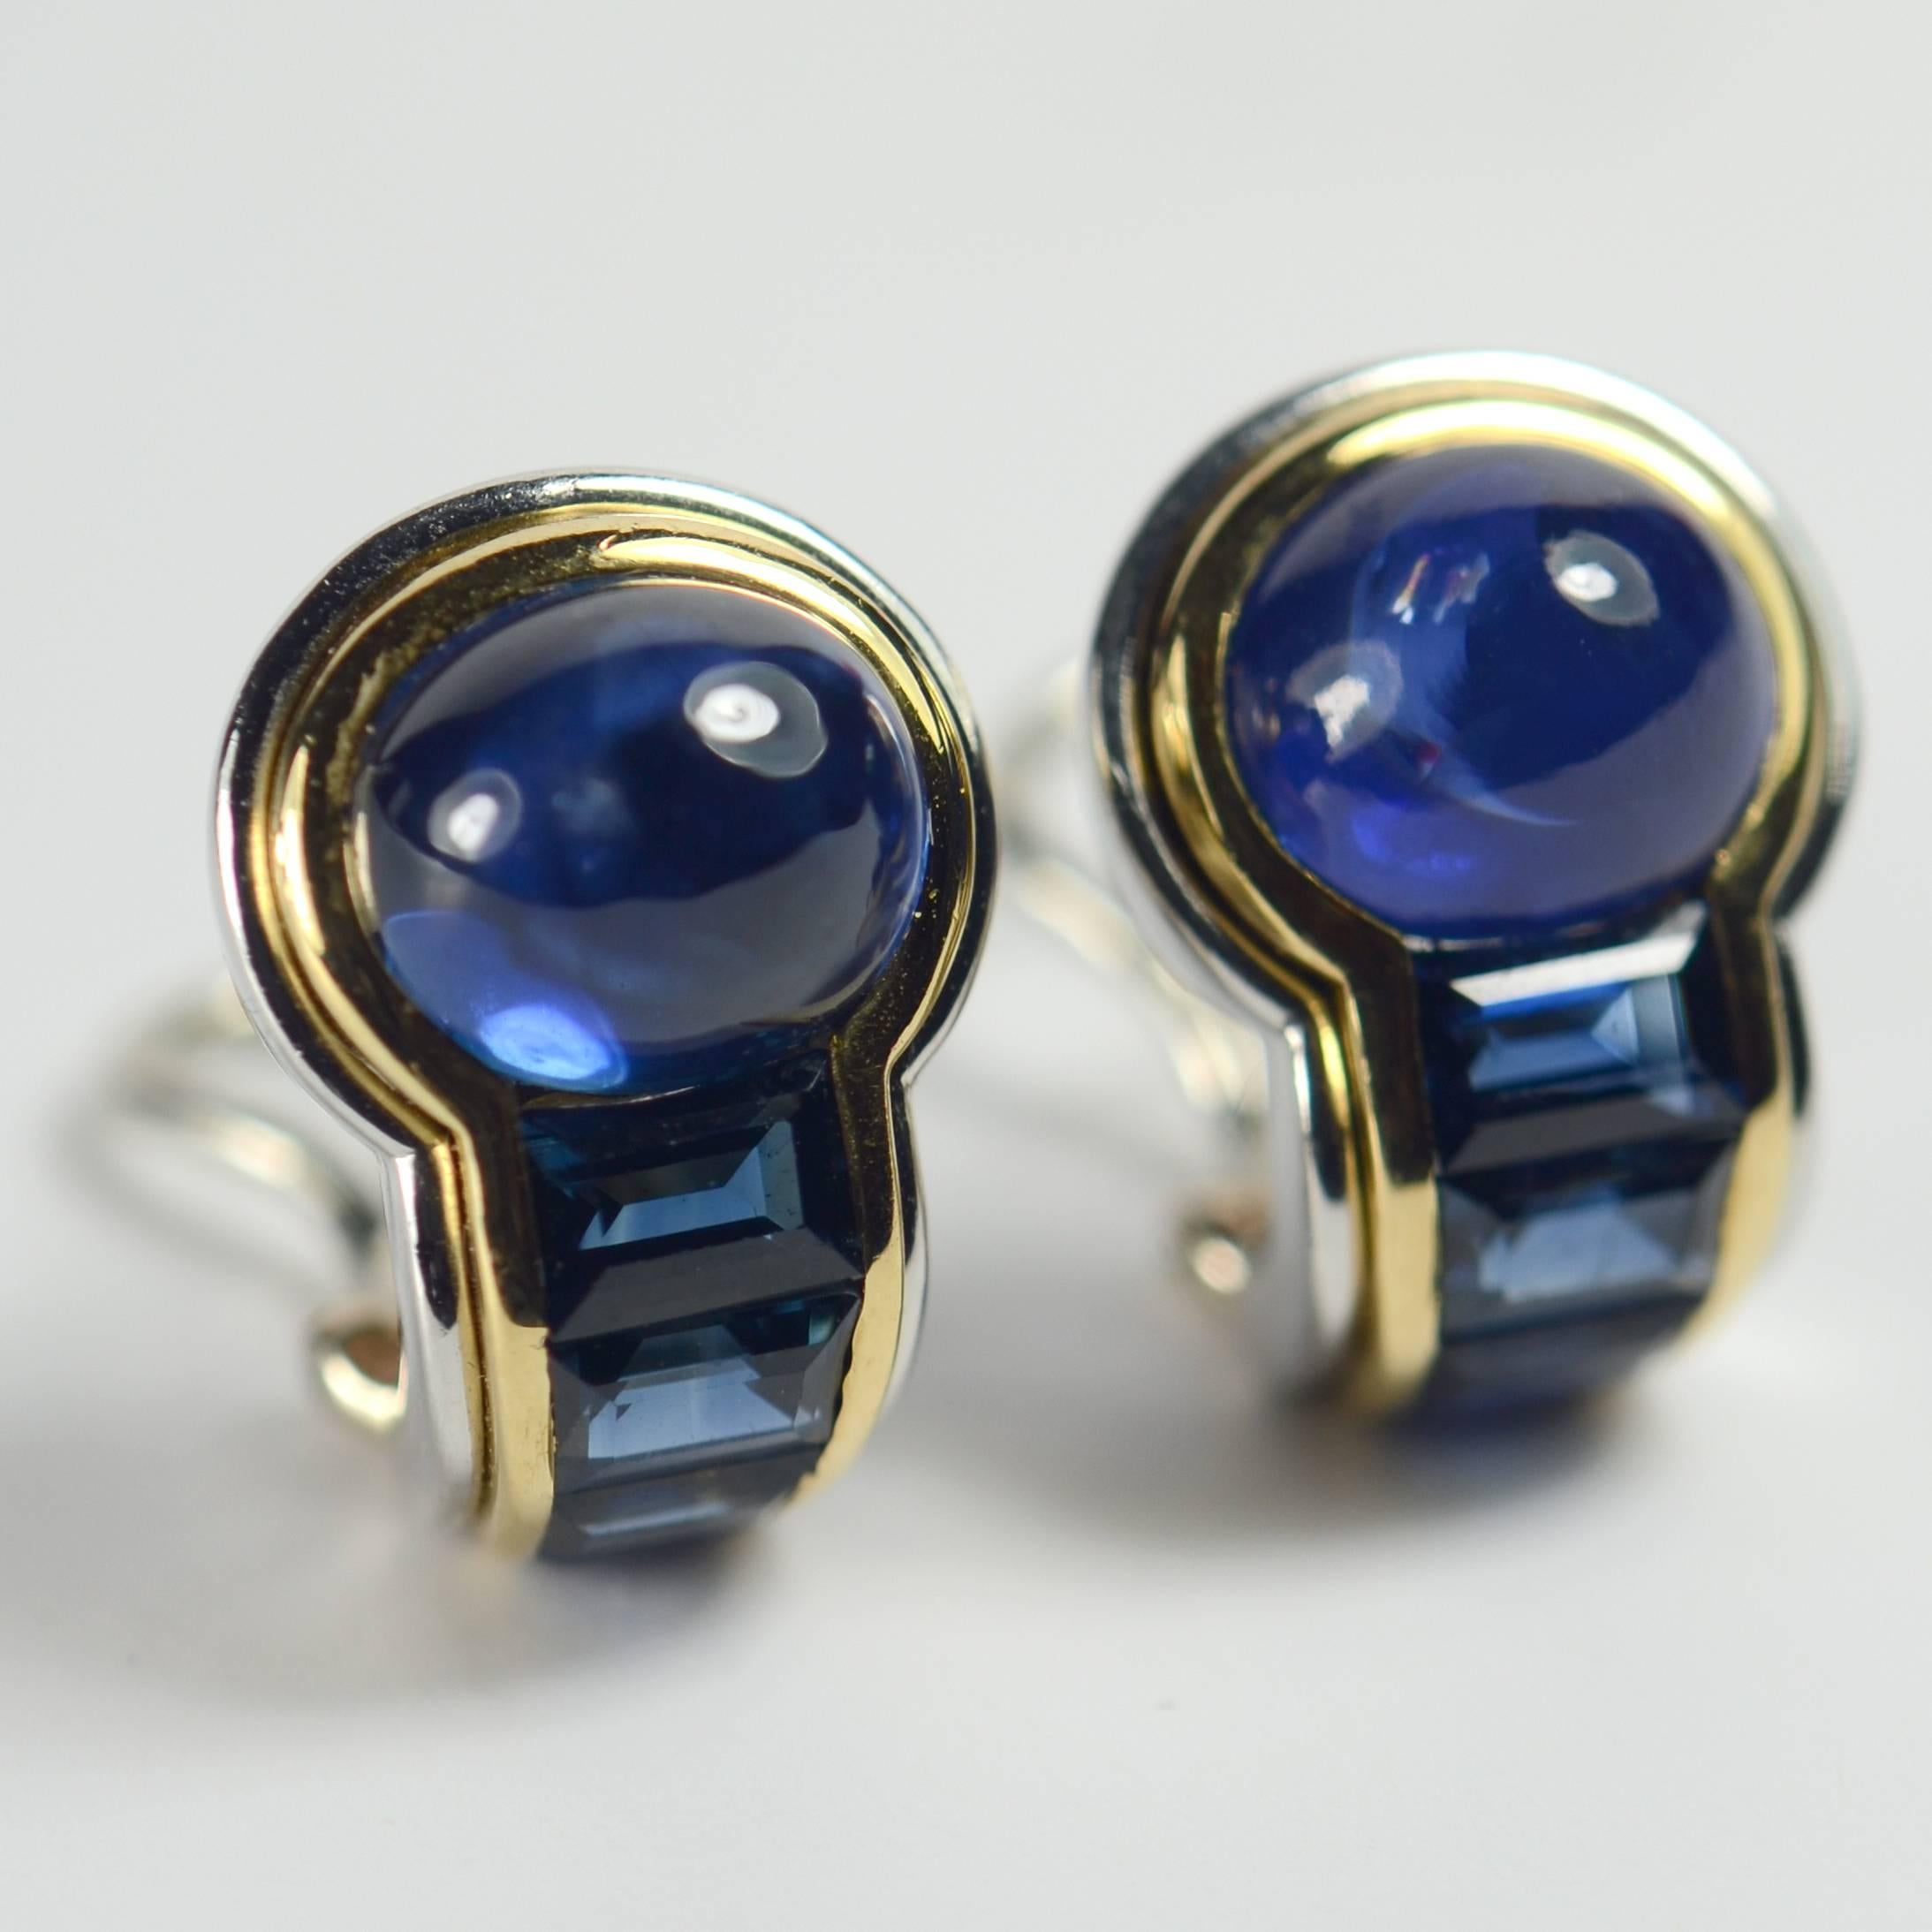 A very chic pair of sapphire earrings mounted in platinum with gold detail by Hemmerle from the 1980s.   Each earring is set with a large oval cabochon sapphire to a tapered line of four emerald-cut and trapeze-cut sapphires.  The earrings have